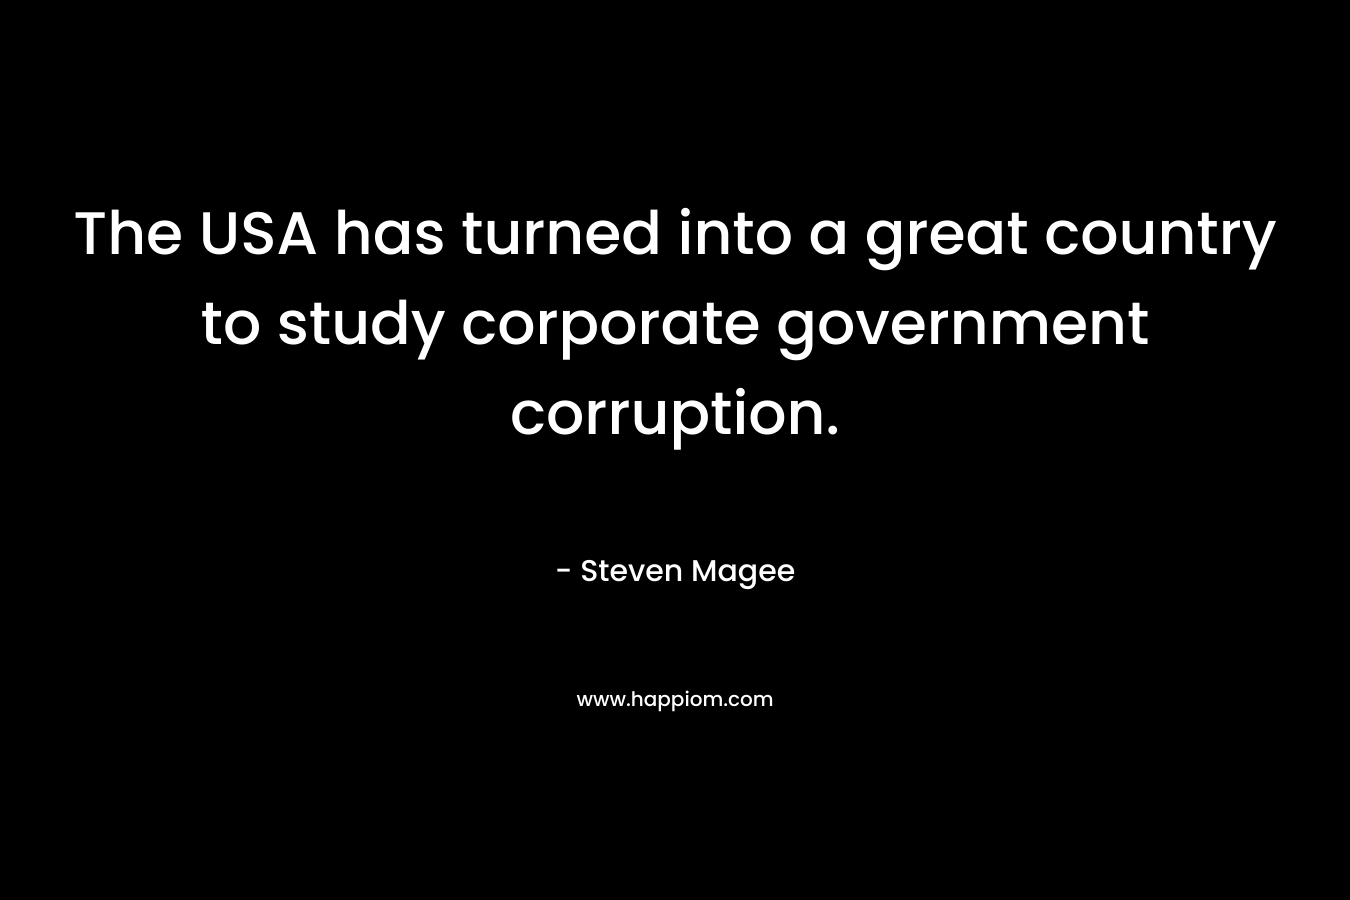 The USA has turned into a great country to study corporate government corruption. – Steven Magee